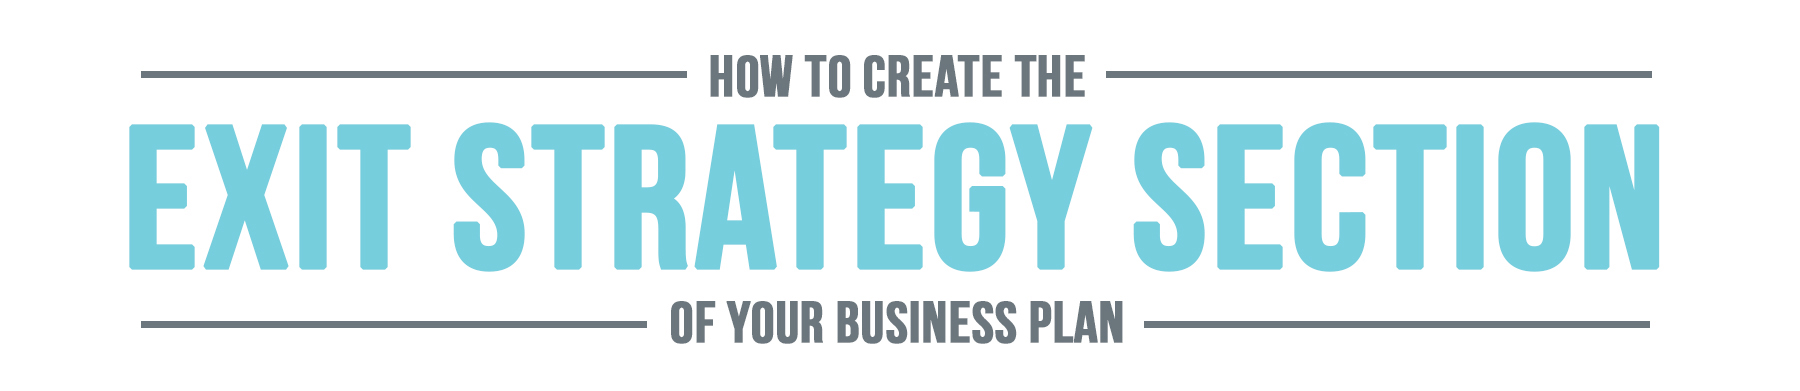 How to Plan an Exit Strategy for Your Small Business